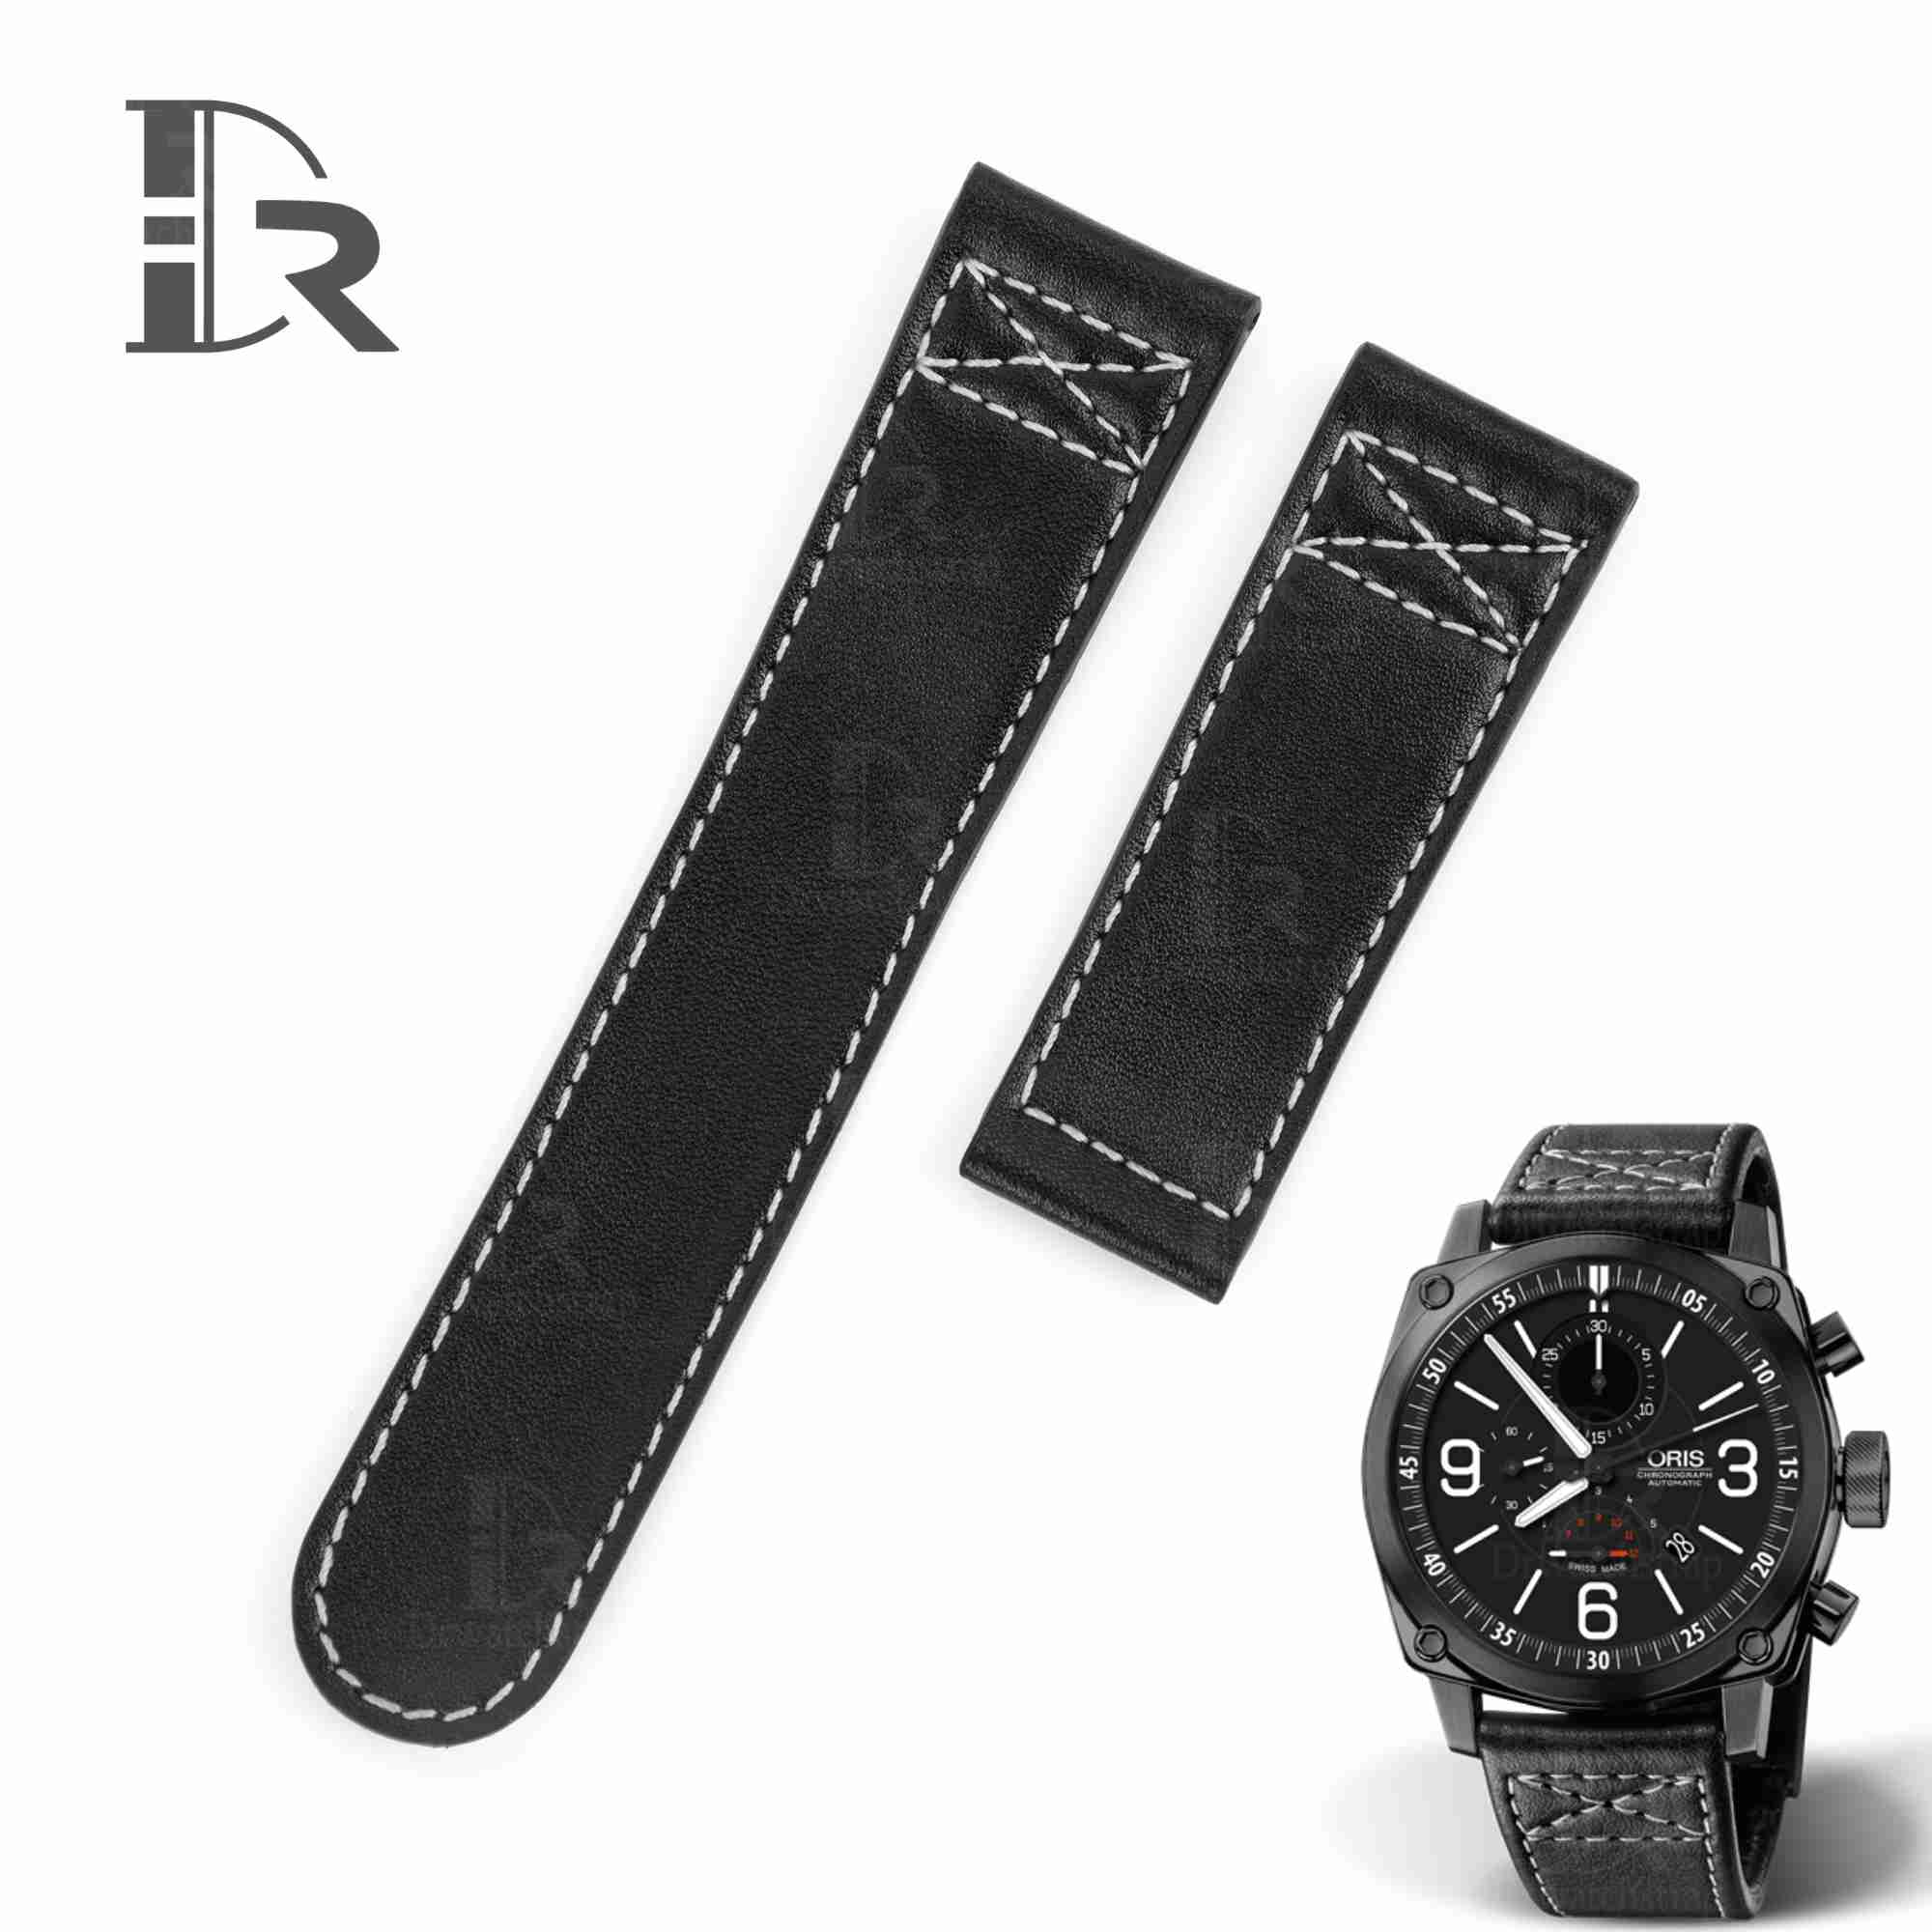 Custom aftermarket watch Oris BC4 straps and watch bands replacement for sale - premium black calf leather with white stitching watchbands online with black strap or bracelet